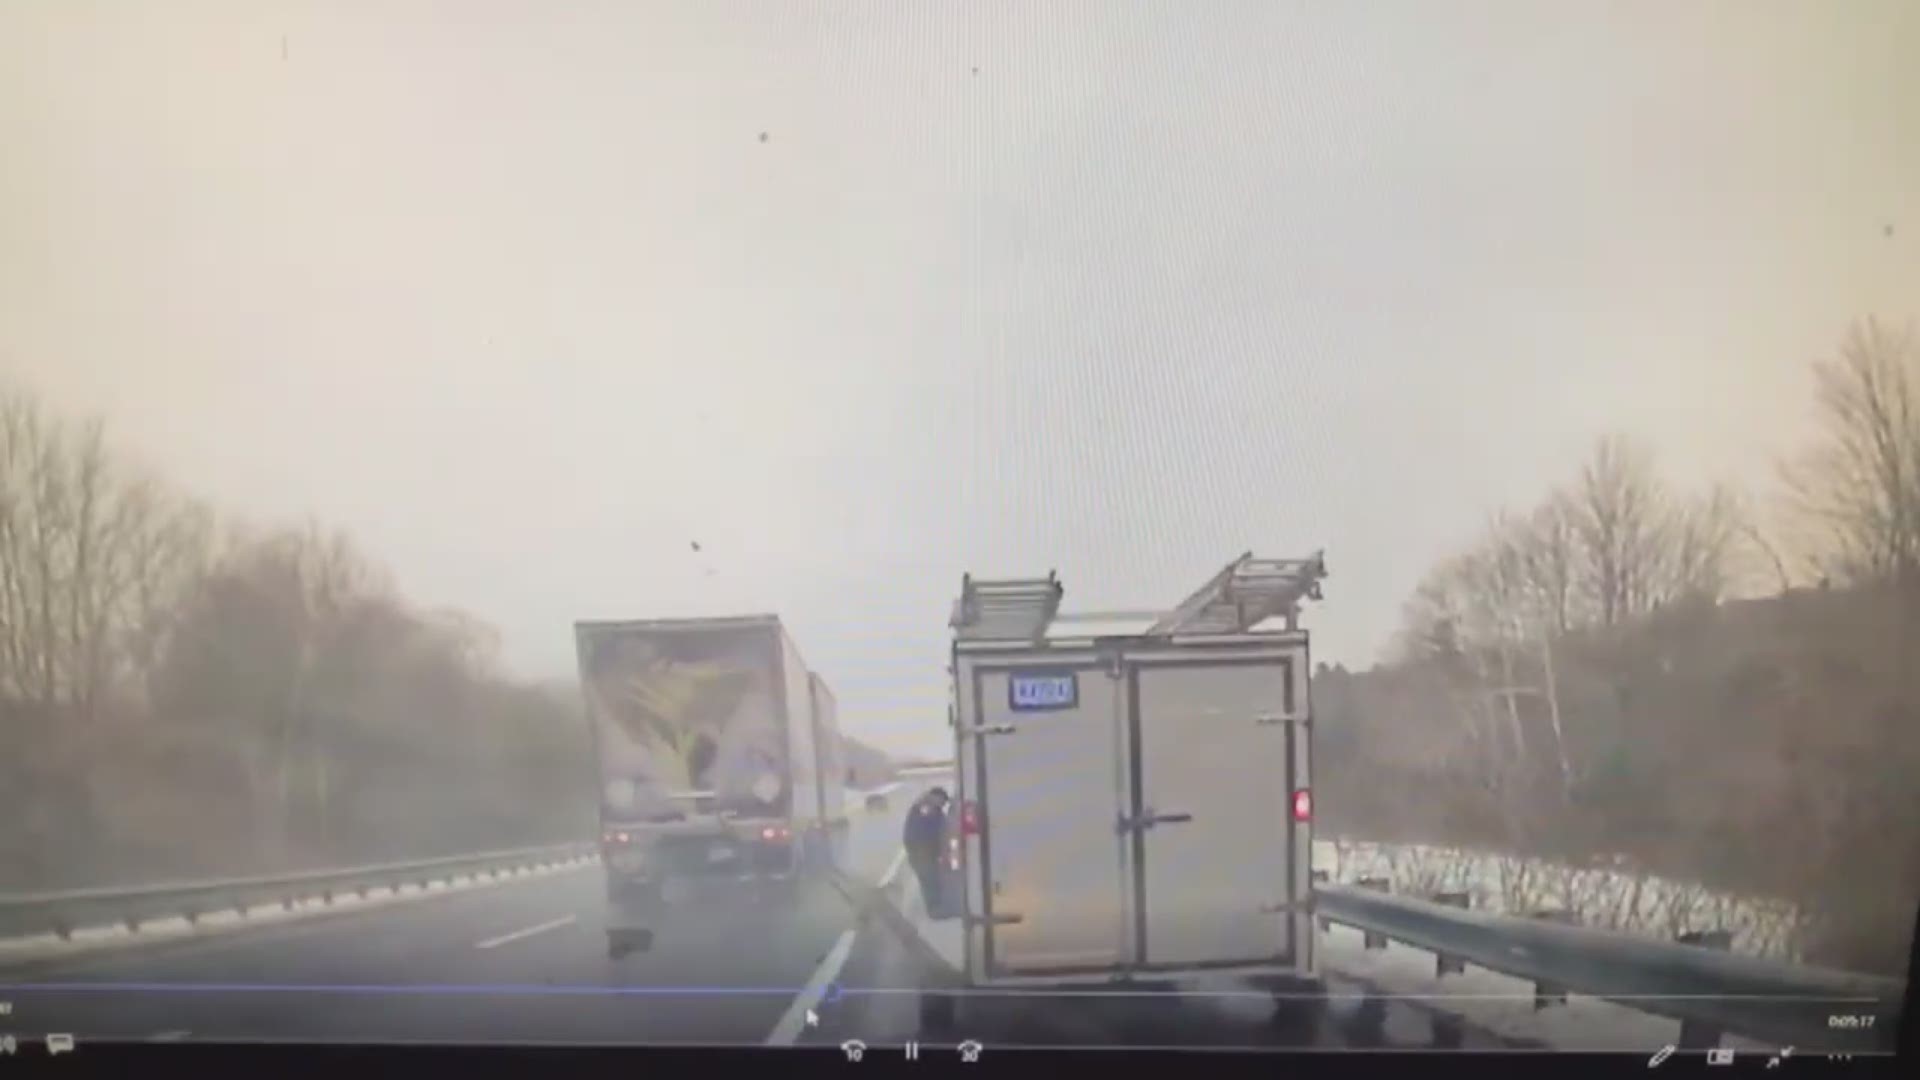 Lt. Brian Quinn of the Sagadahoc County Sheriff's Department is almost hit by 18 wheeler while on a traffic stop on I-295